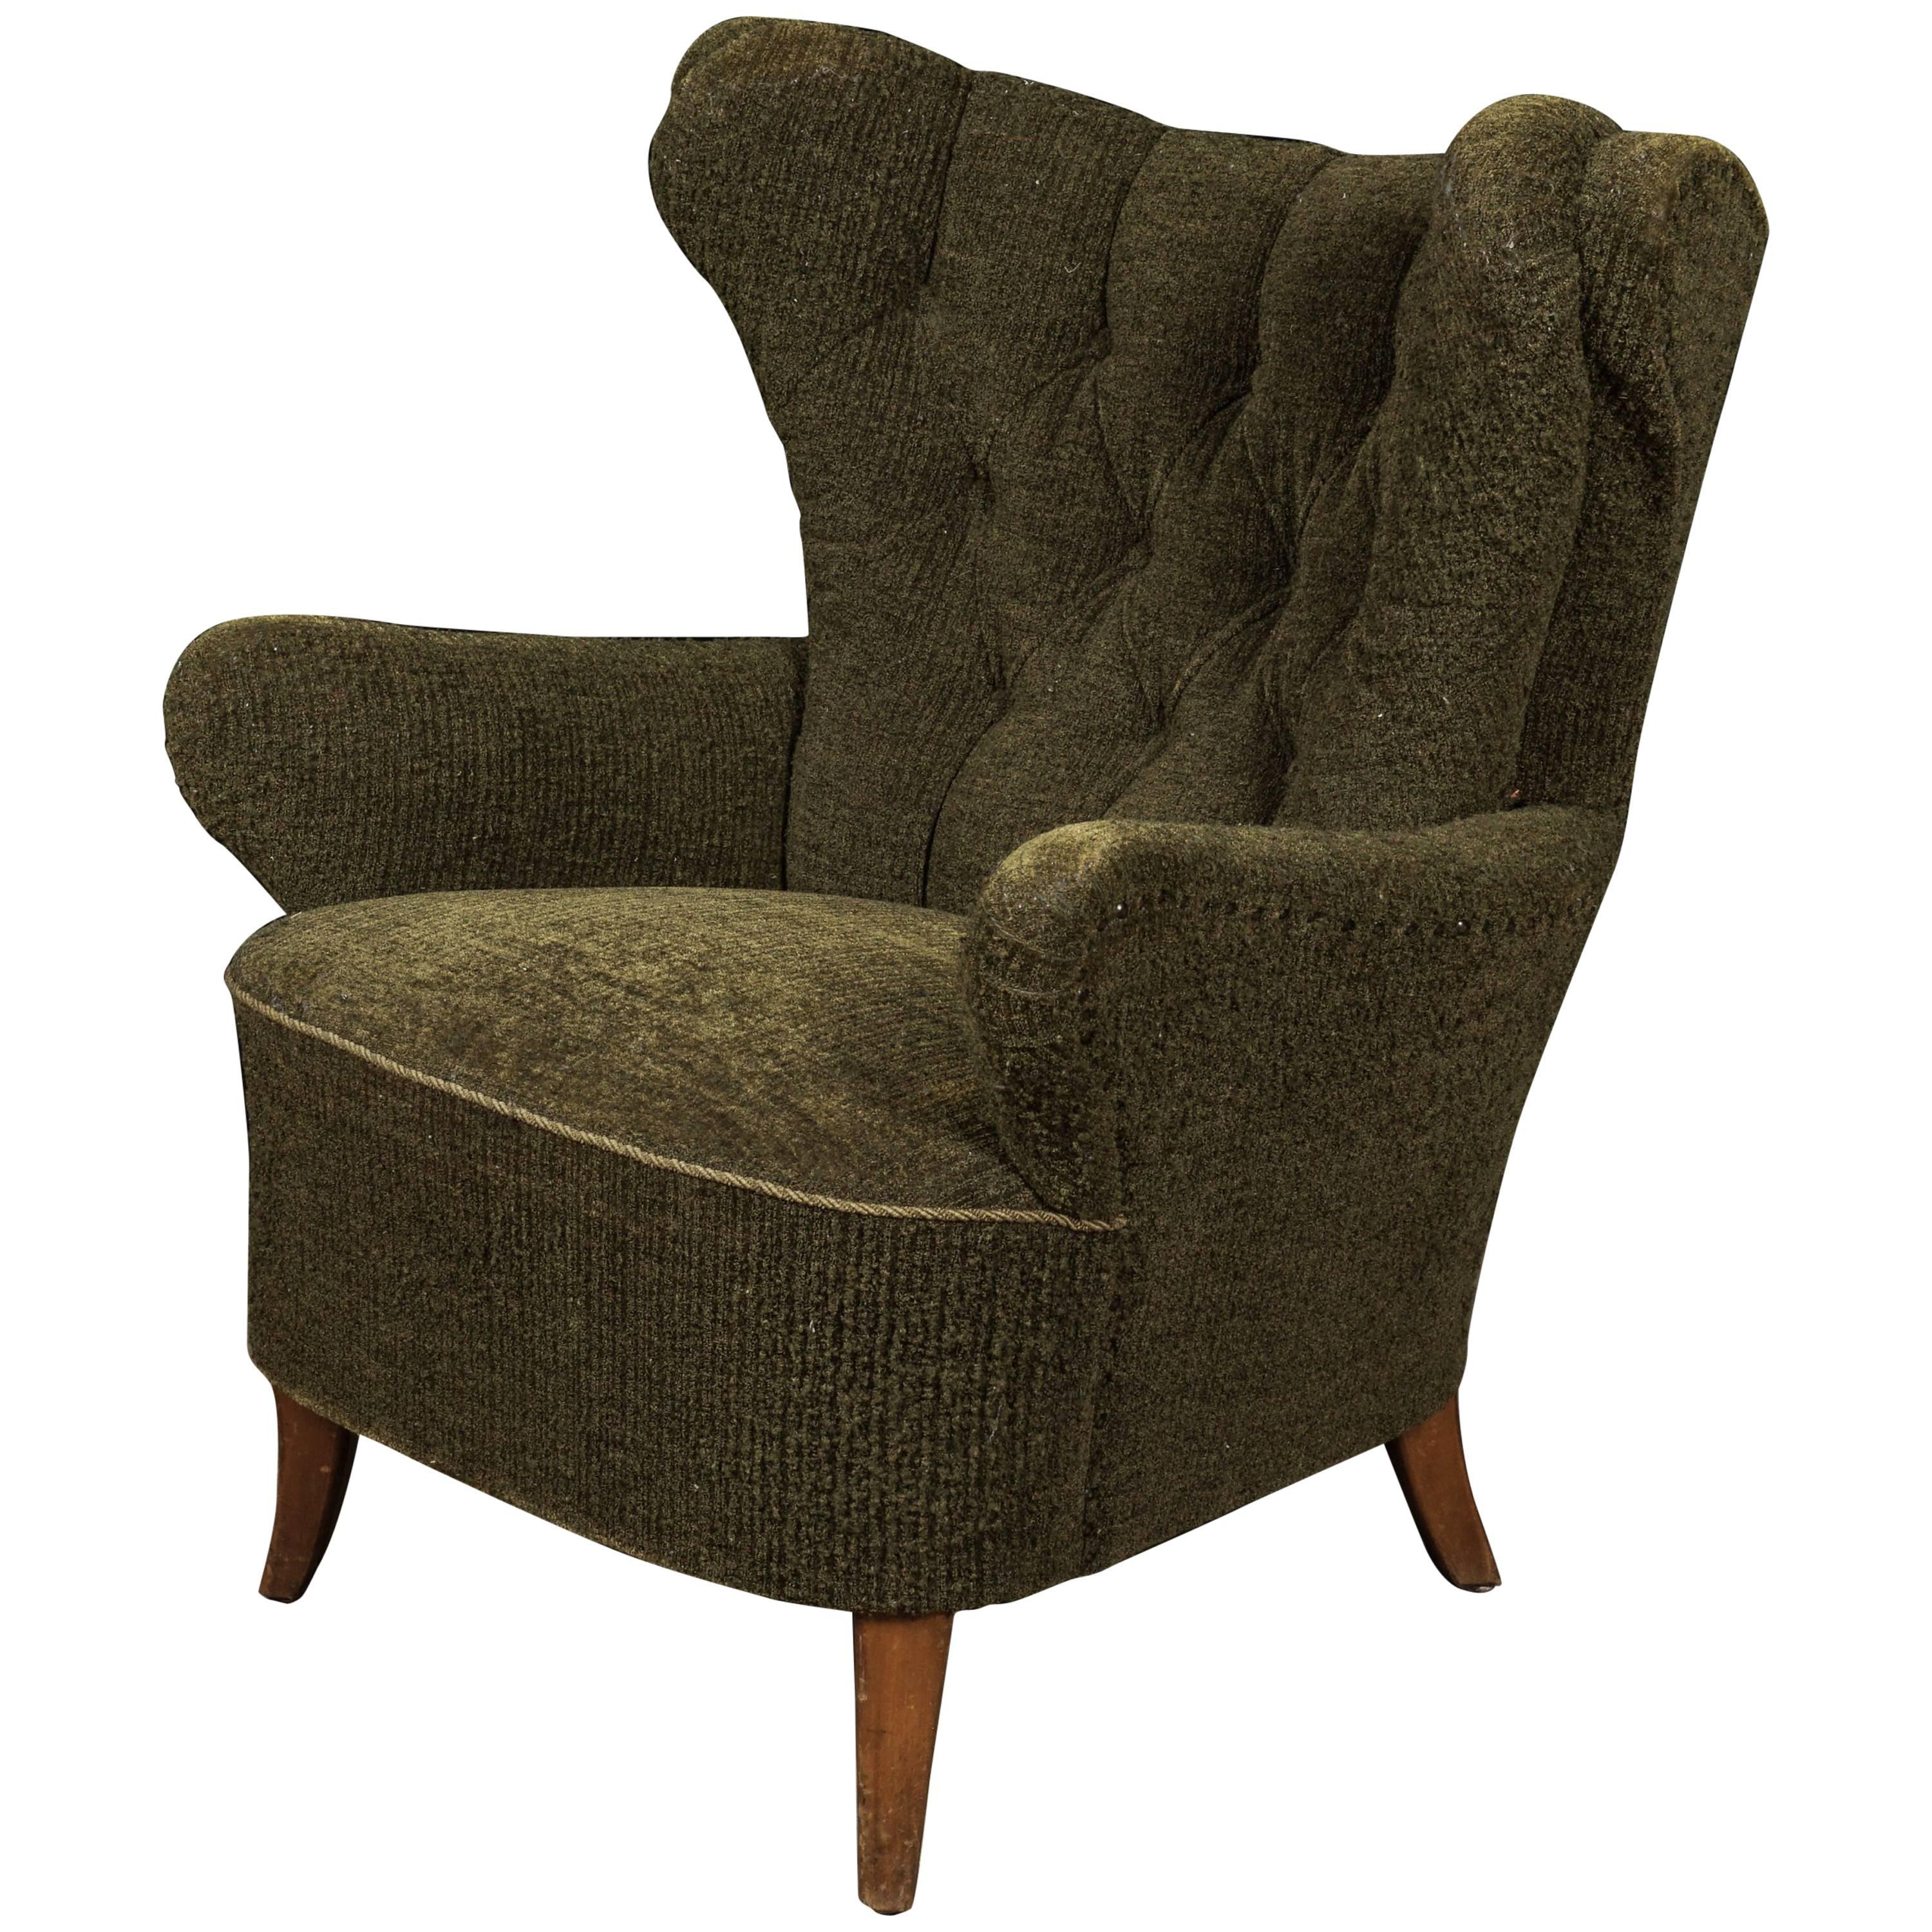 Midcentury Wingback Chair from Denmark, circa 1960